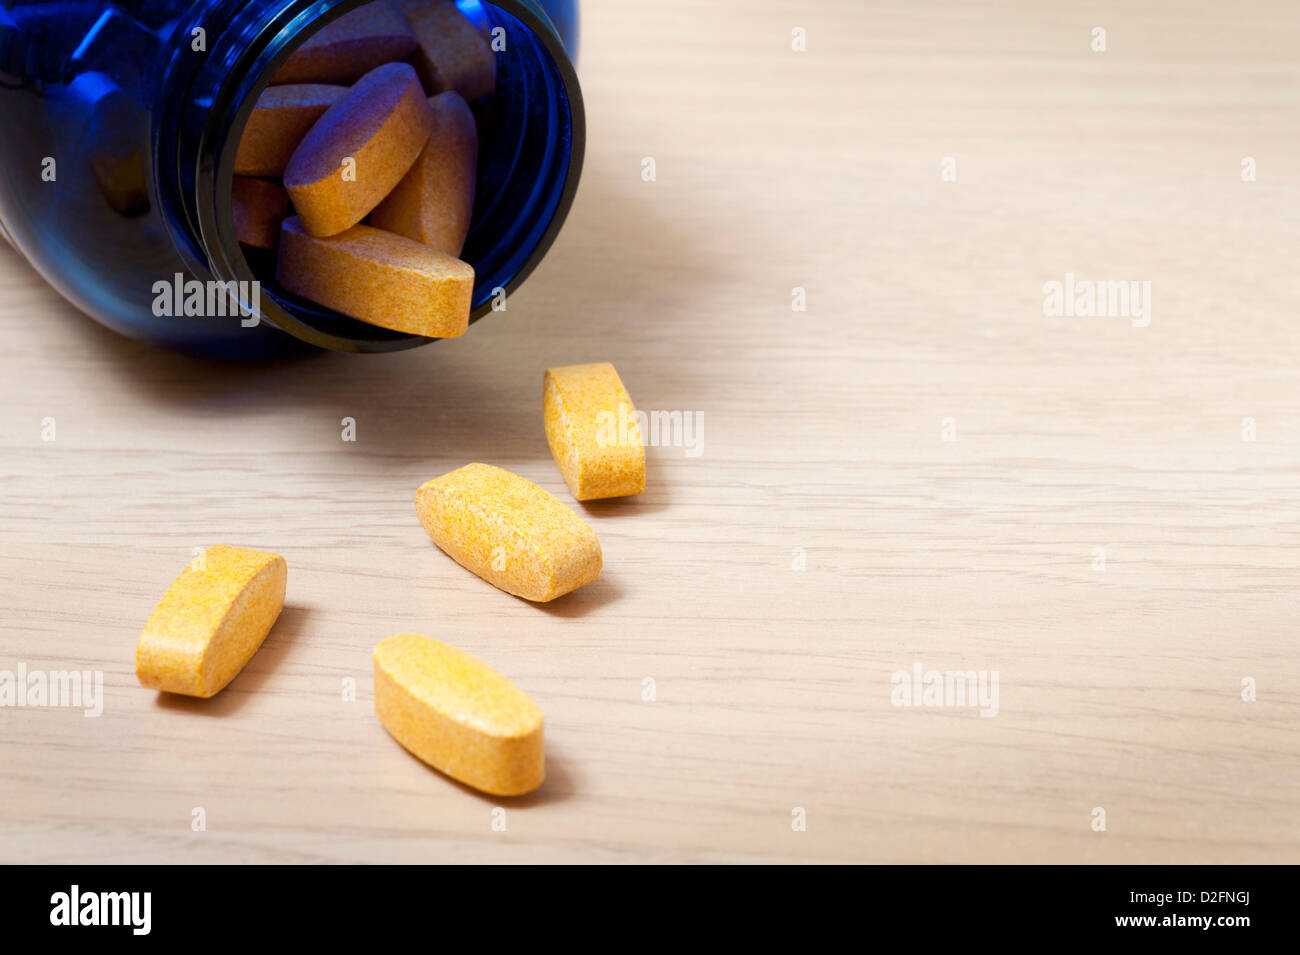 Blue bottle of yellow vitamin pills with some spilling out onto the table Stock Photo